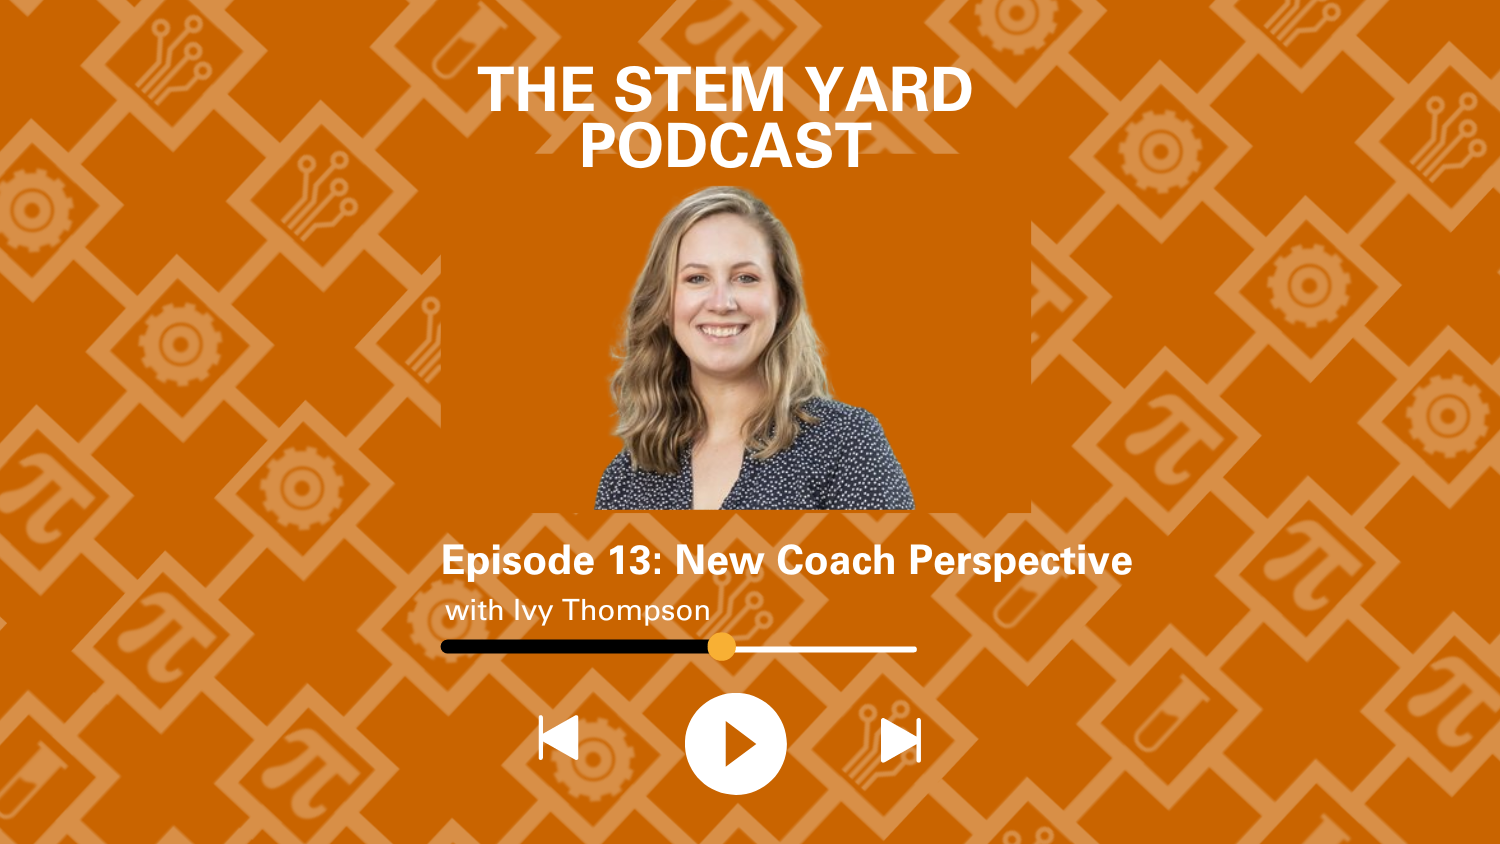 The STEM Yard Episode 13 - New Coach Perspective with Ivy Thompson